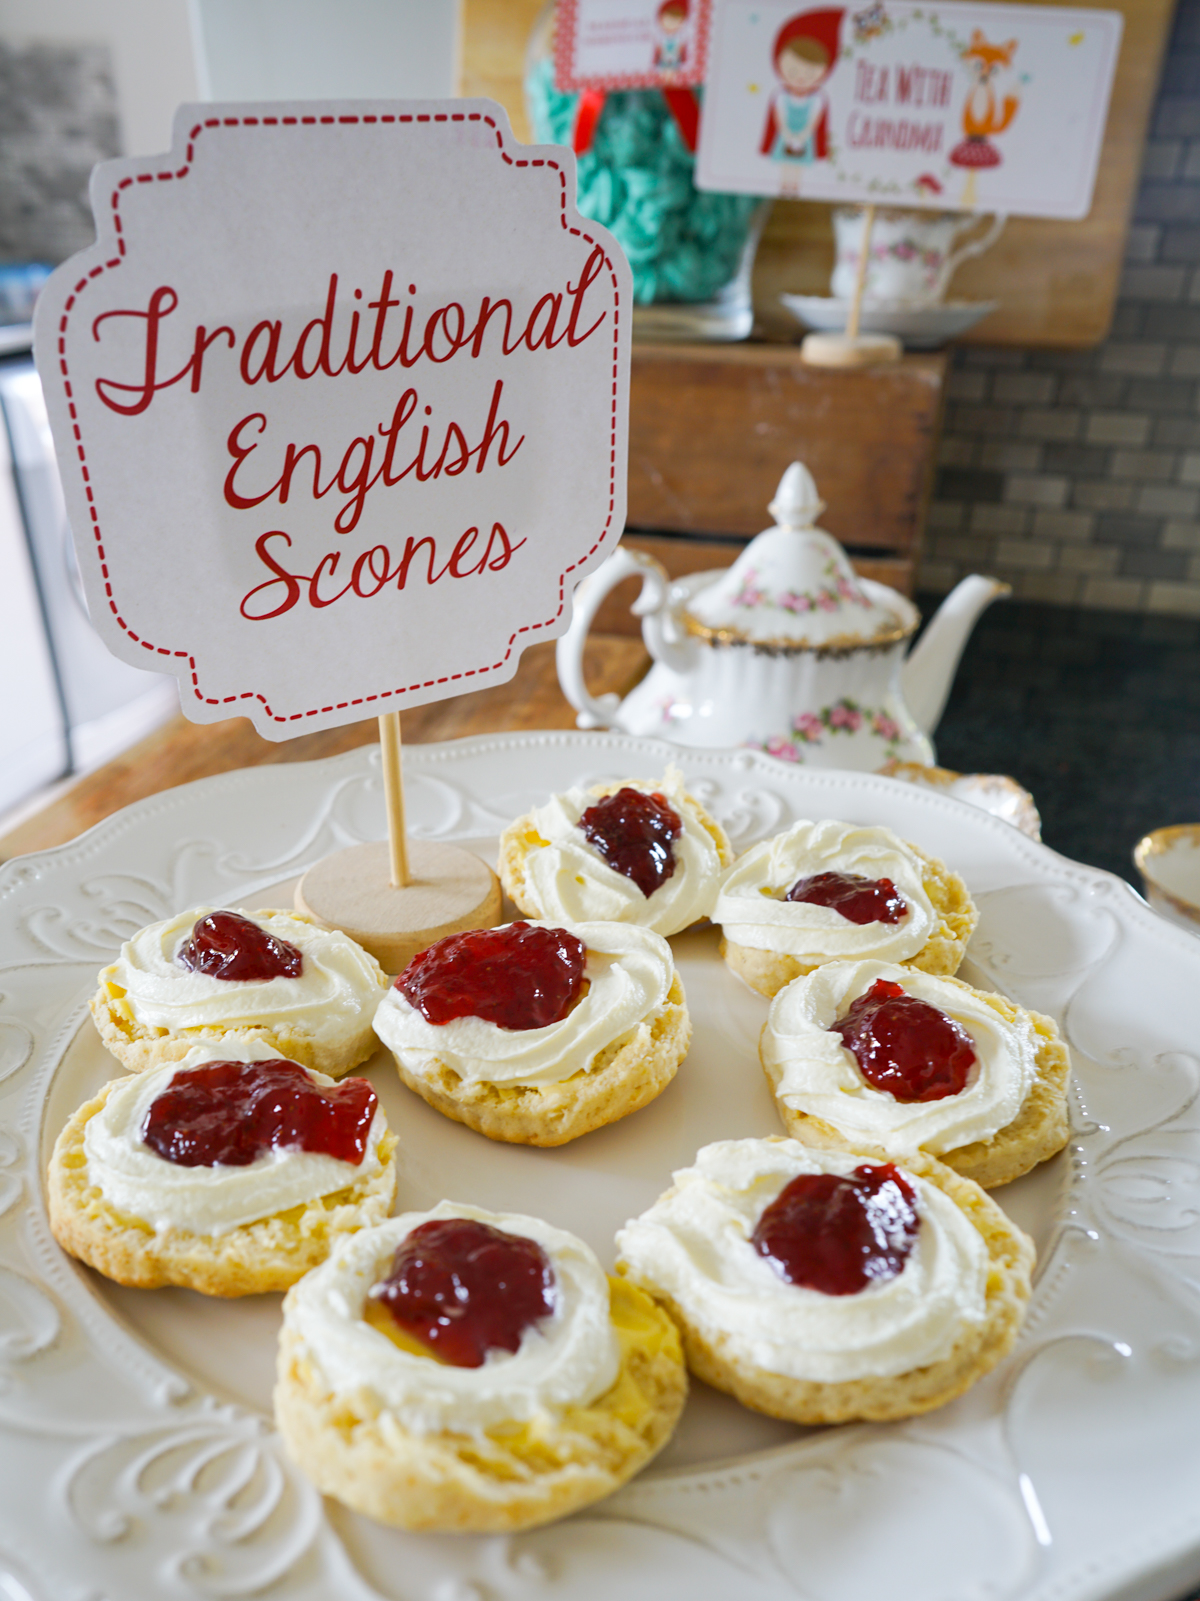 Little Red Riding Hood Party Food Ideas of scones with cream and jam